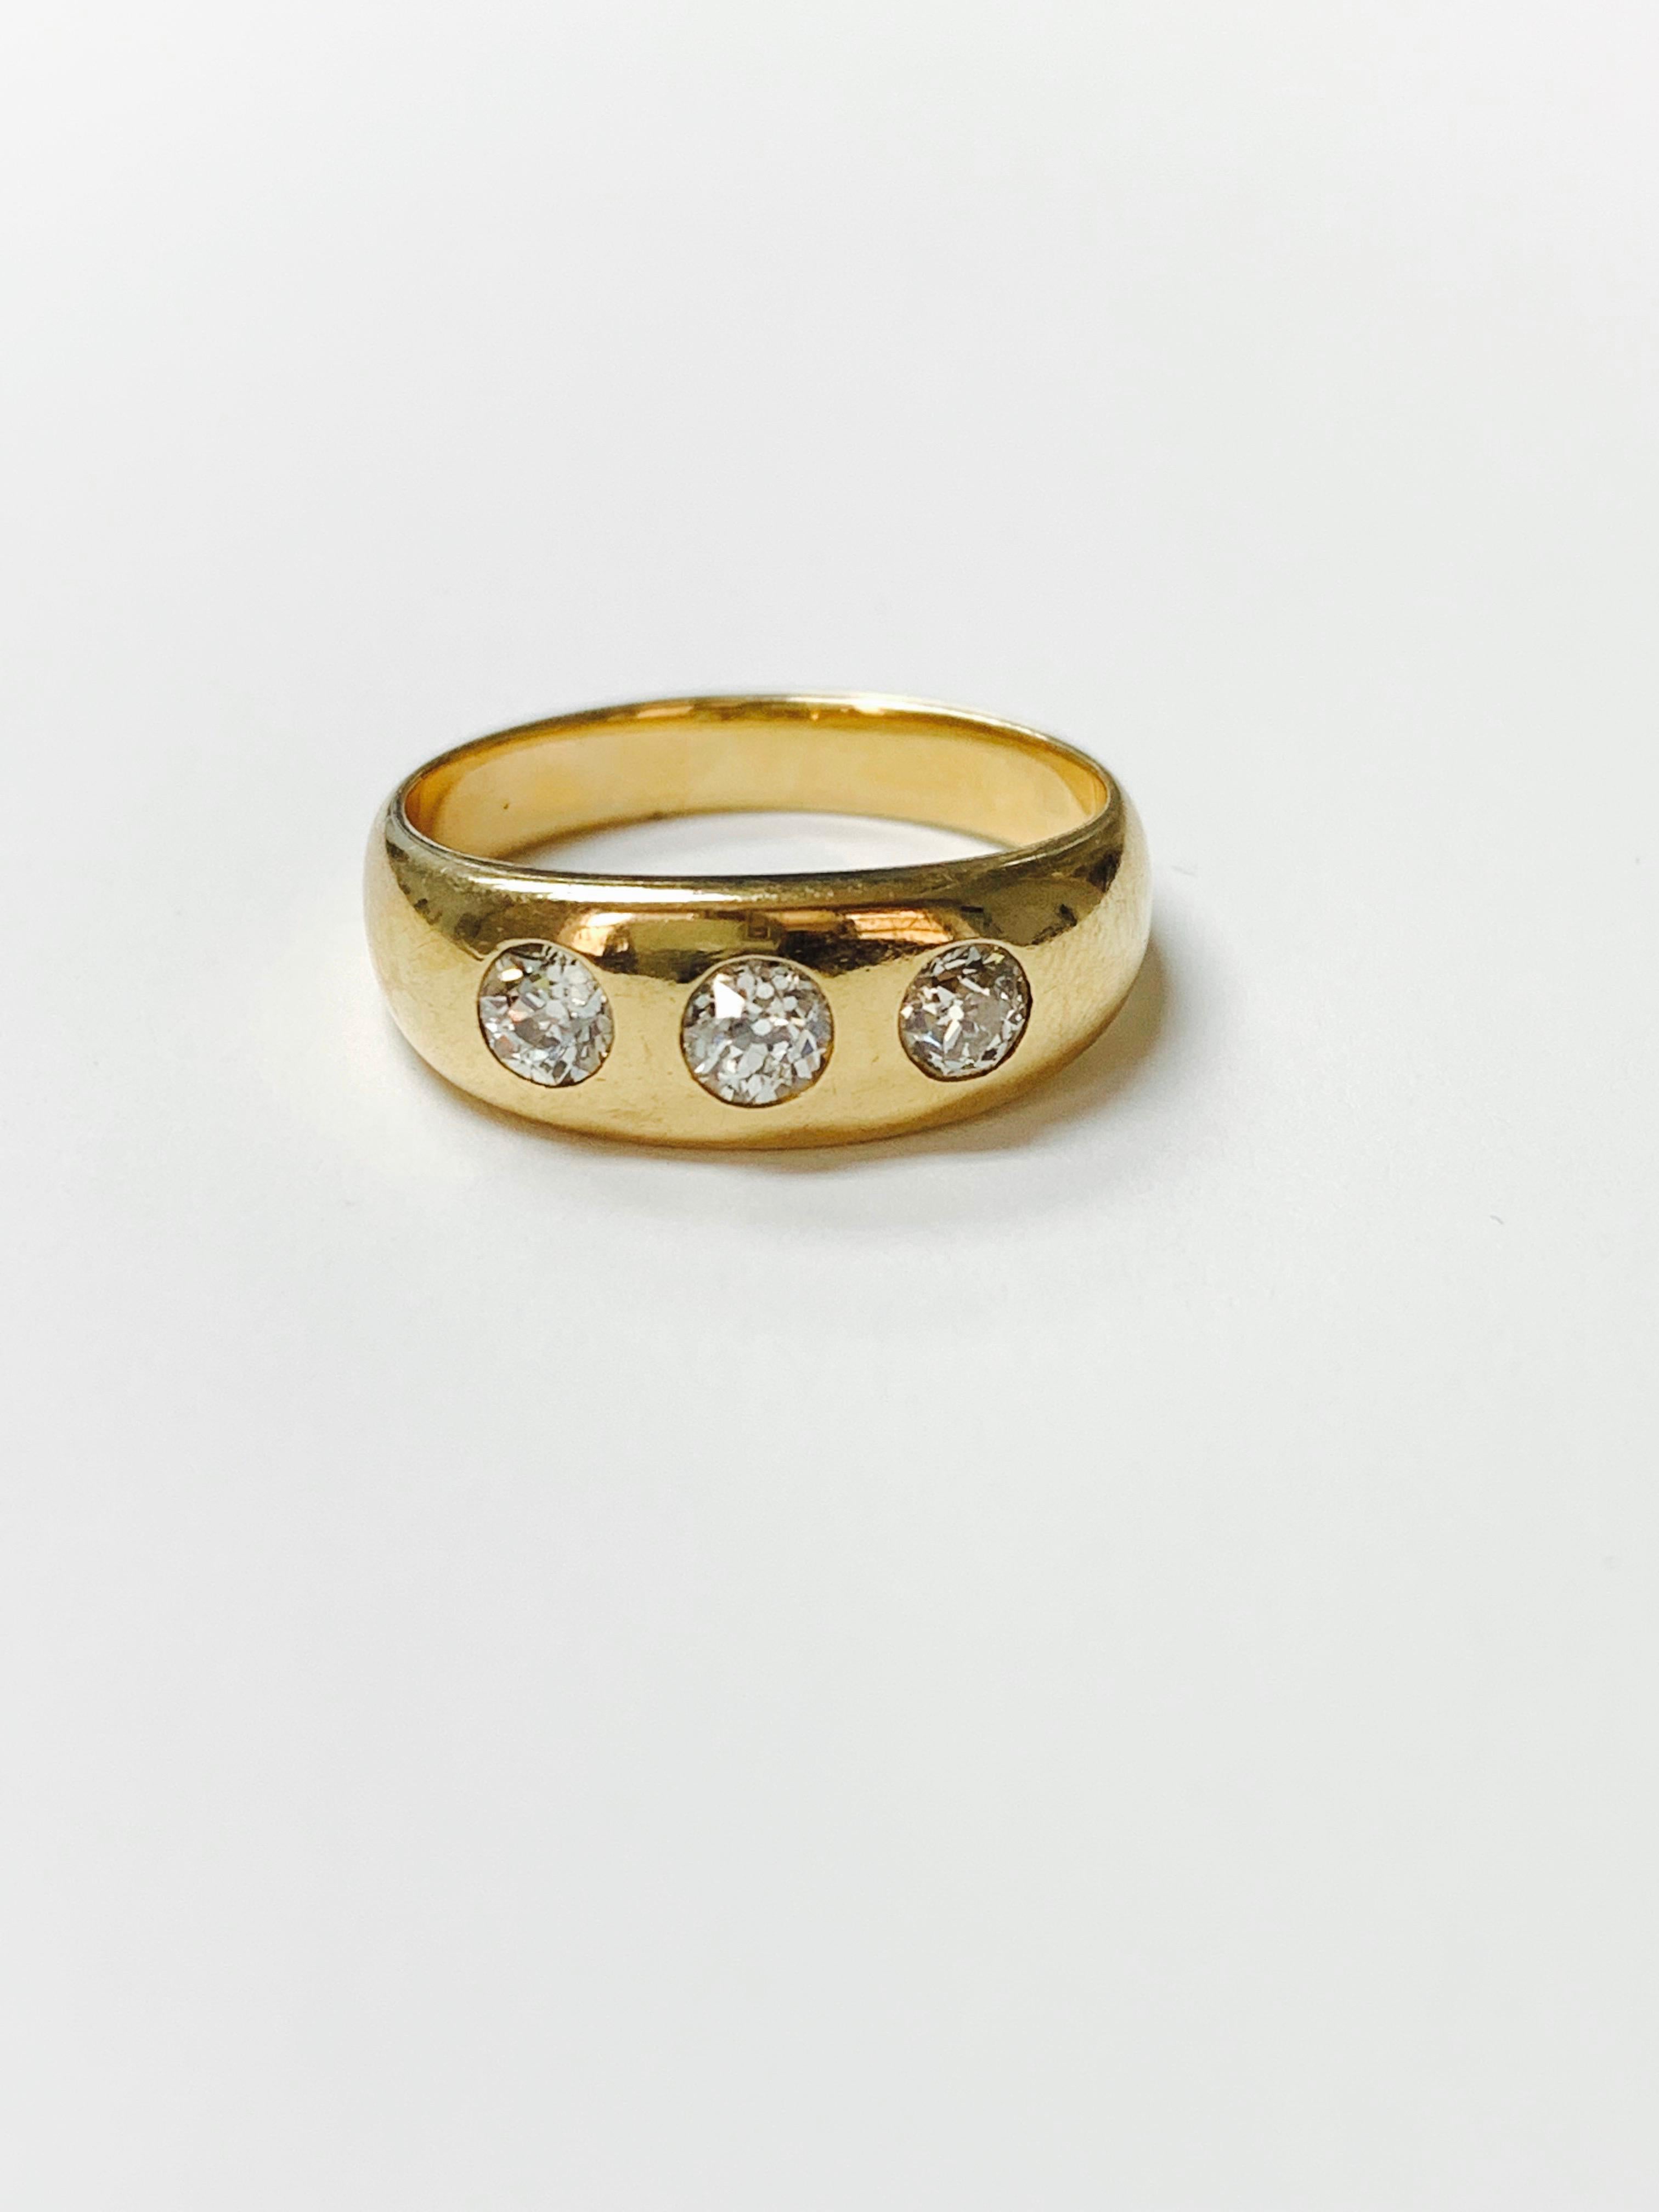 14k gold ring with 3 diamonds